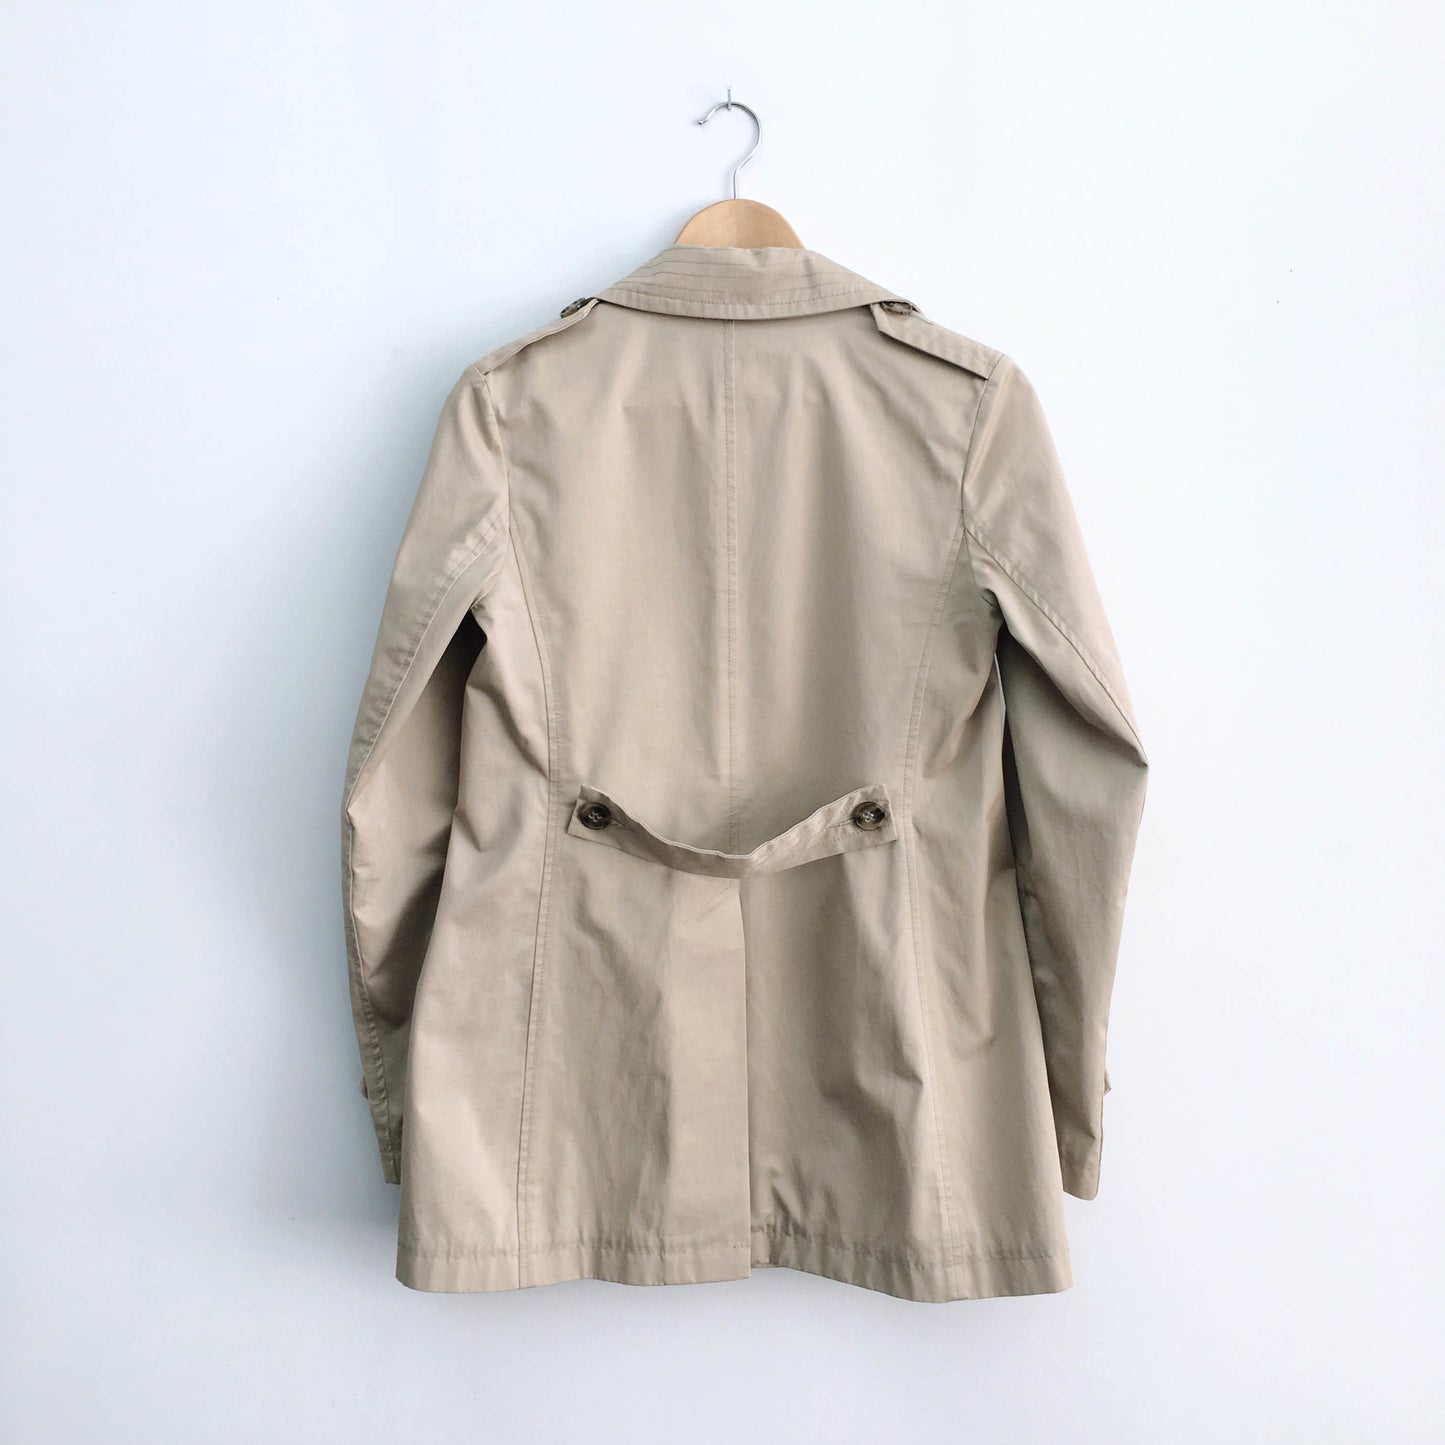 Theory half-belt Trench Coat in Natural - size Small